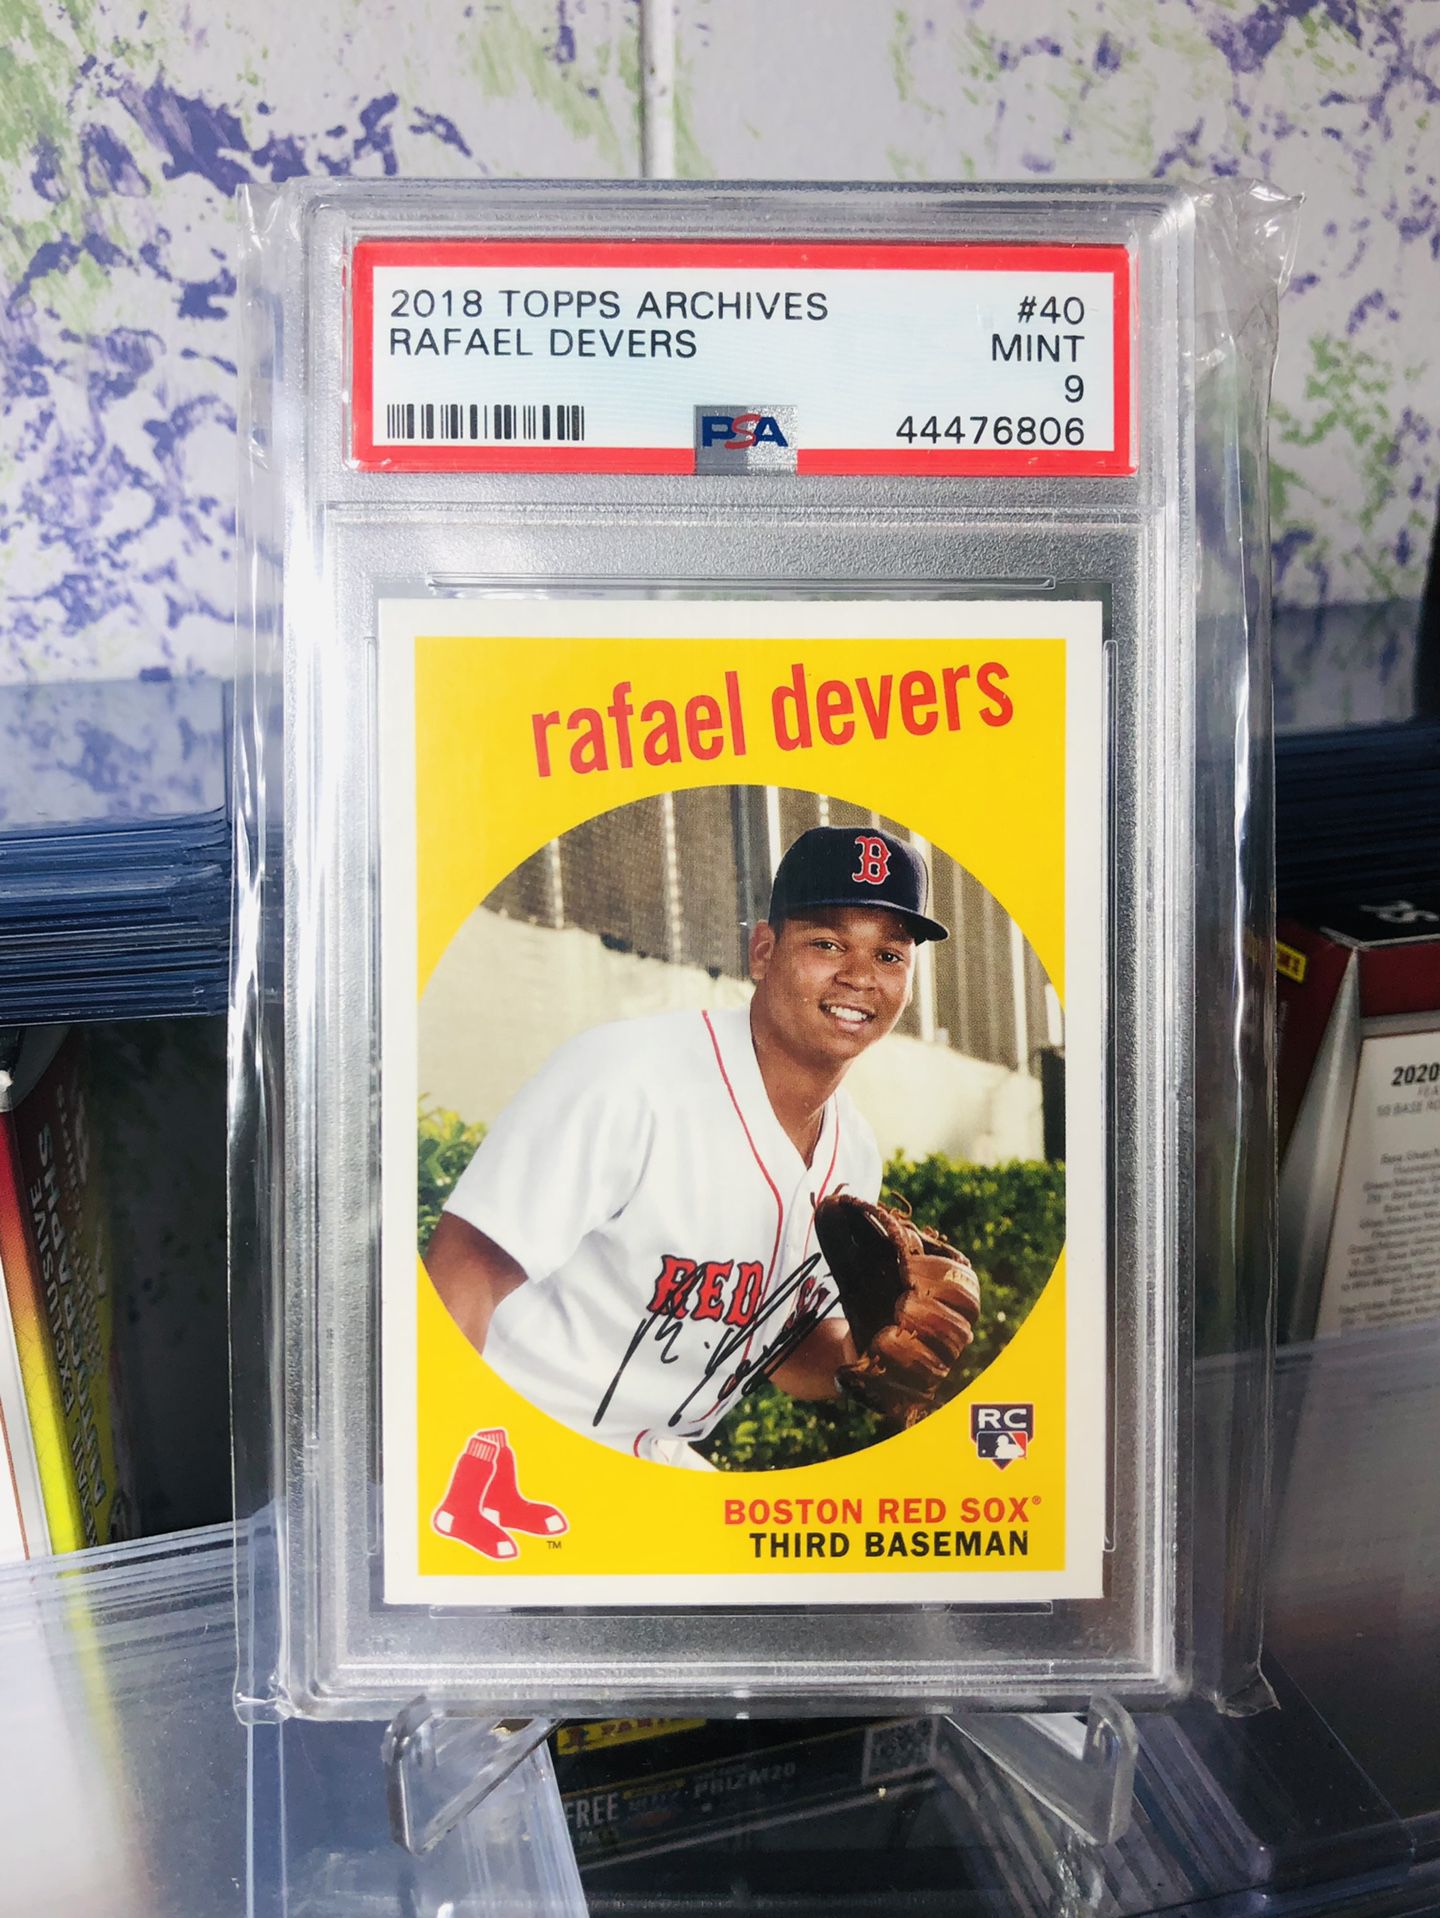 2018 Topps Archive Rafael Devers Rookie Card graded 9 by PSA